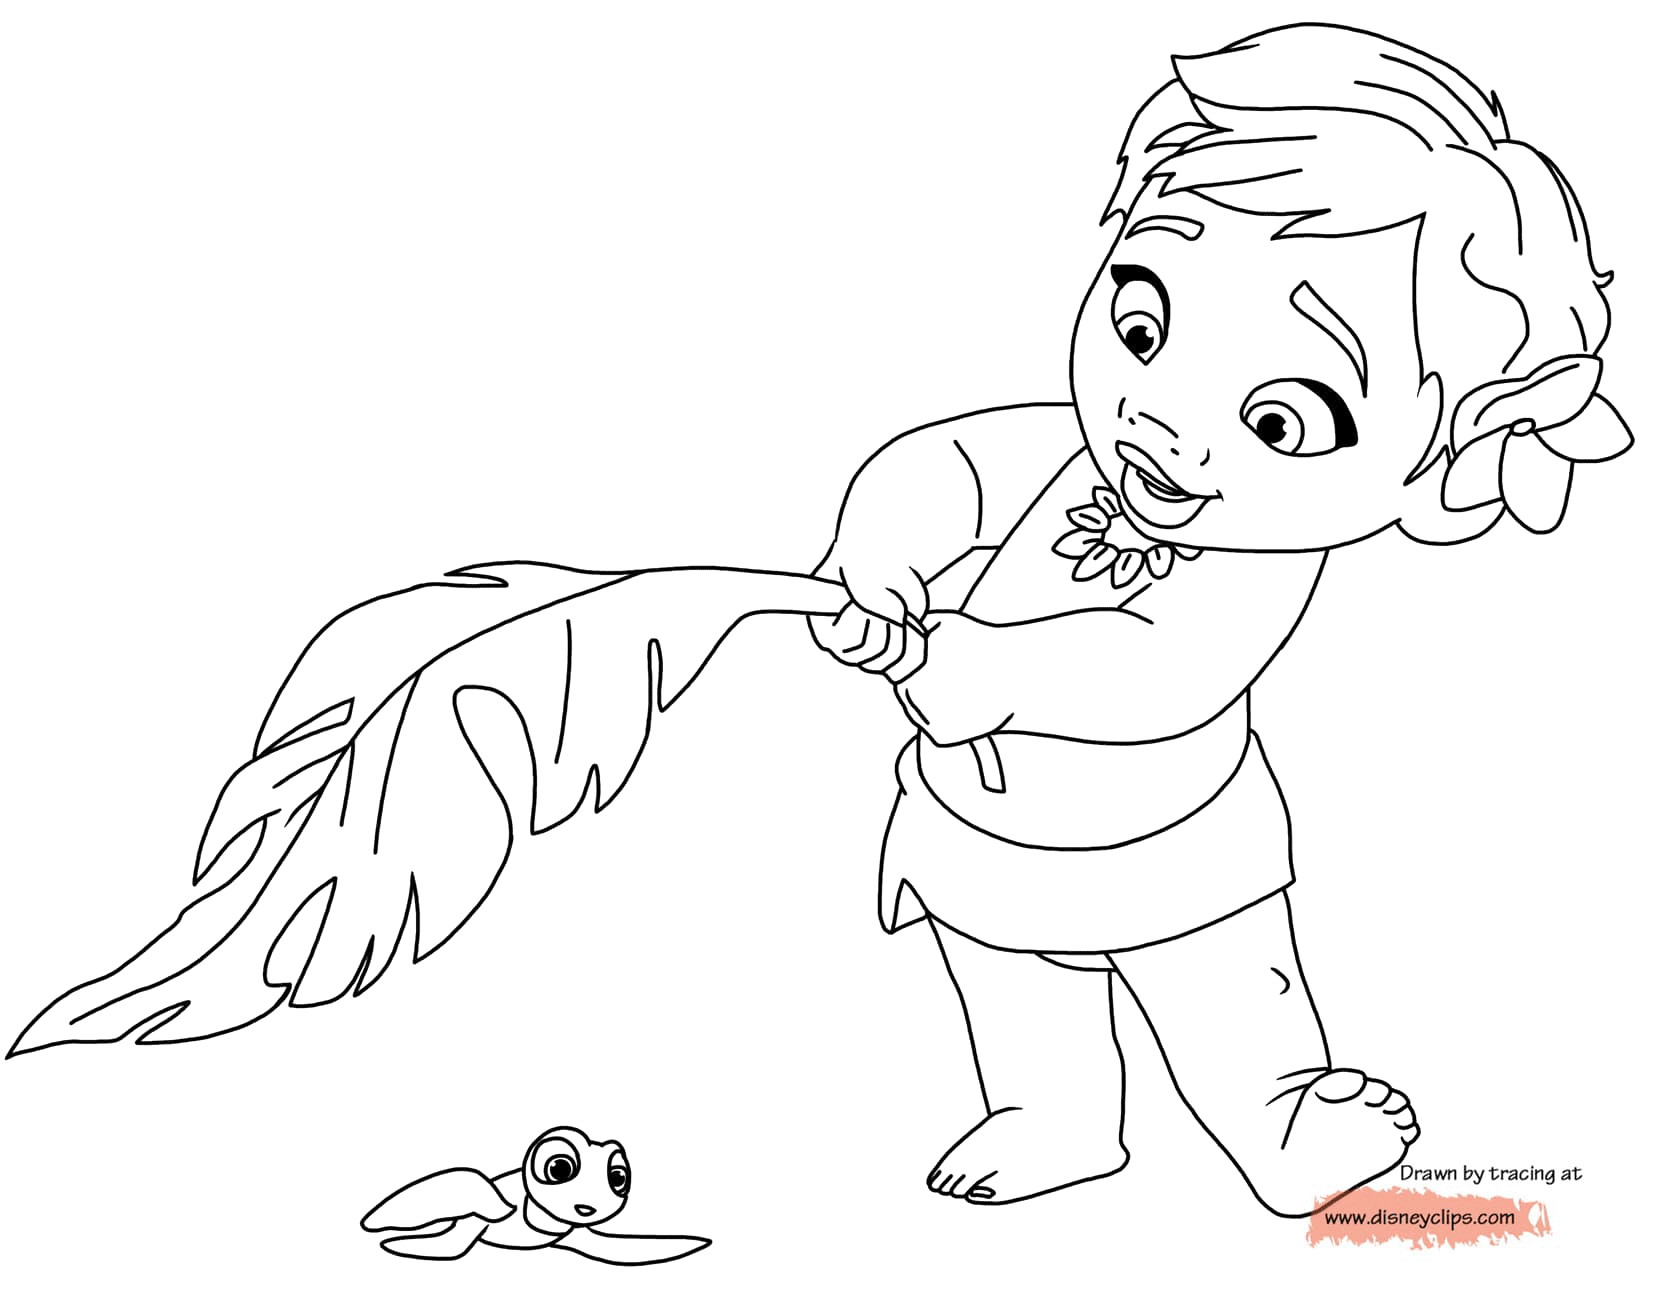 Download Disney's Moana Coloring Pages | Disneyclips.com